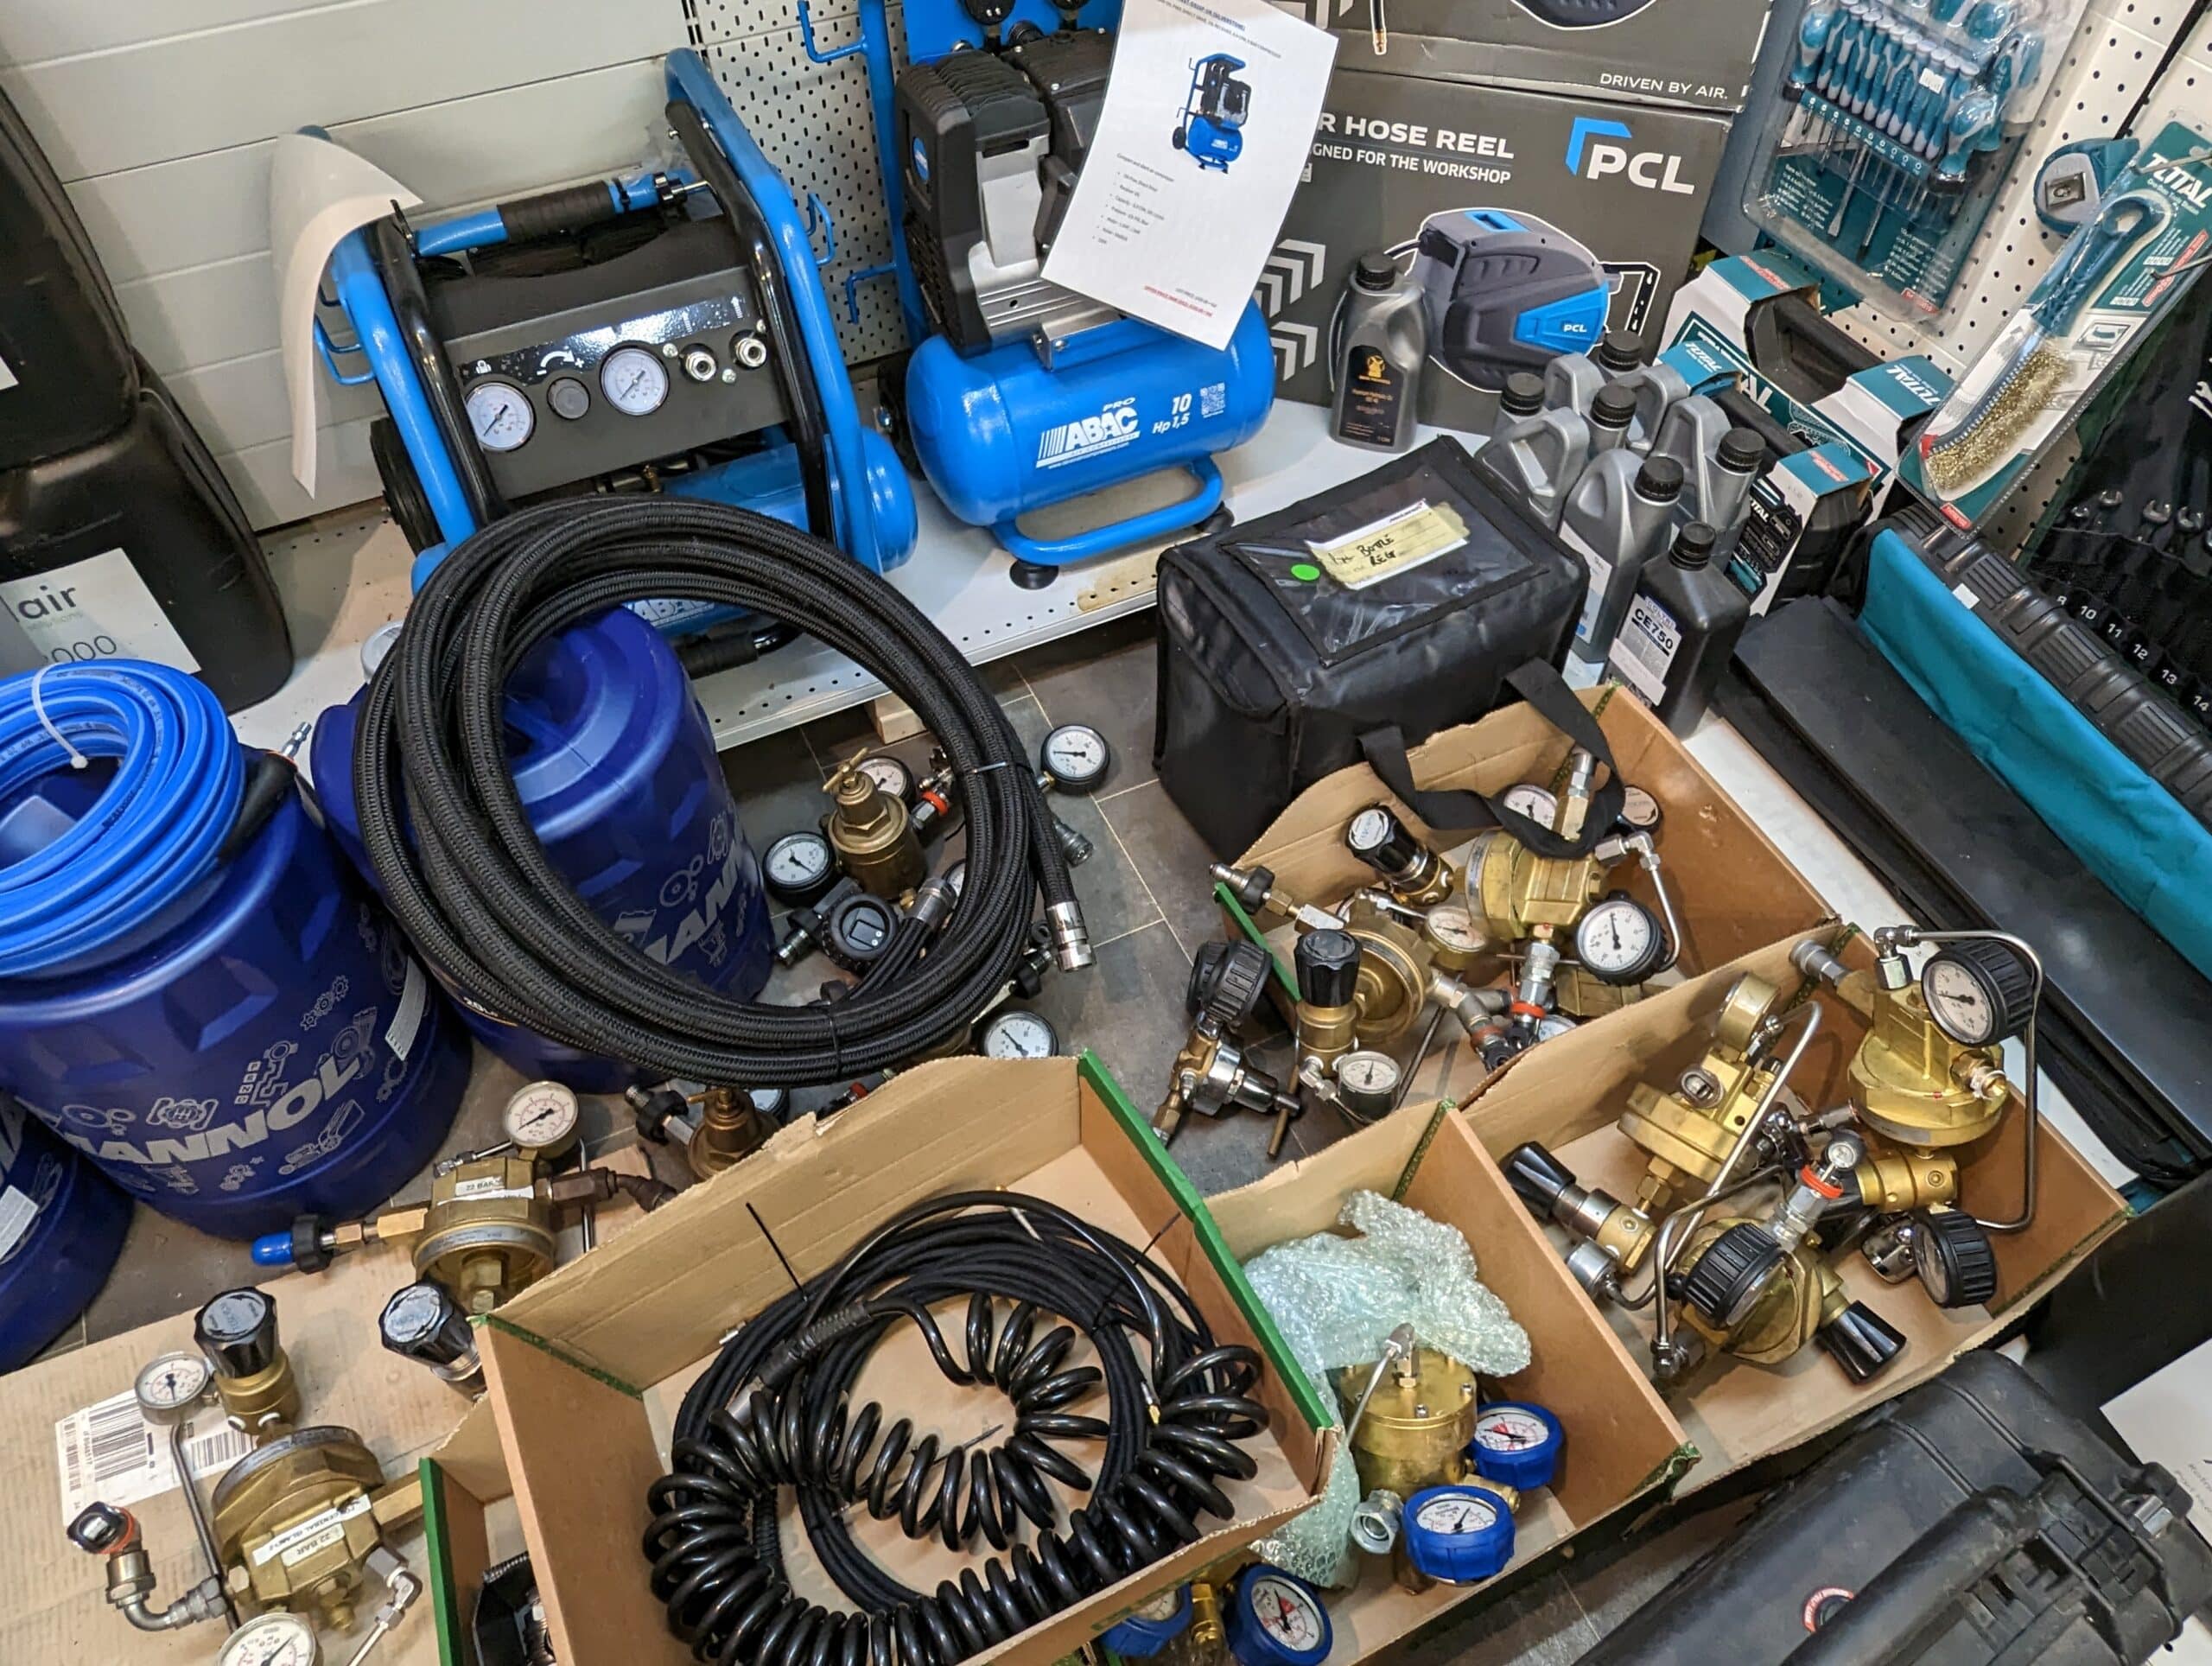 Air compressor fittings, hoses, gauges and spare parts used for our air compressor services